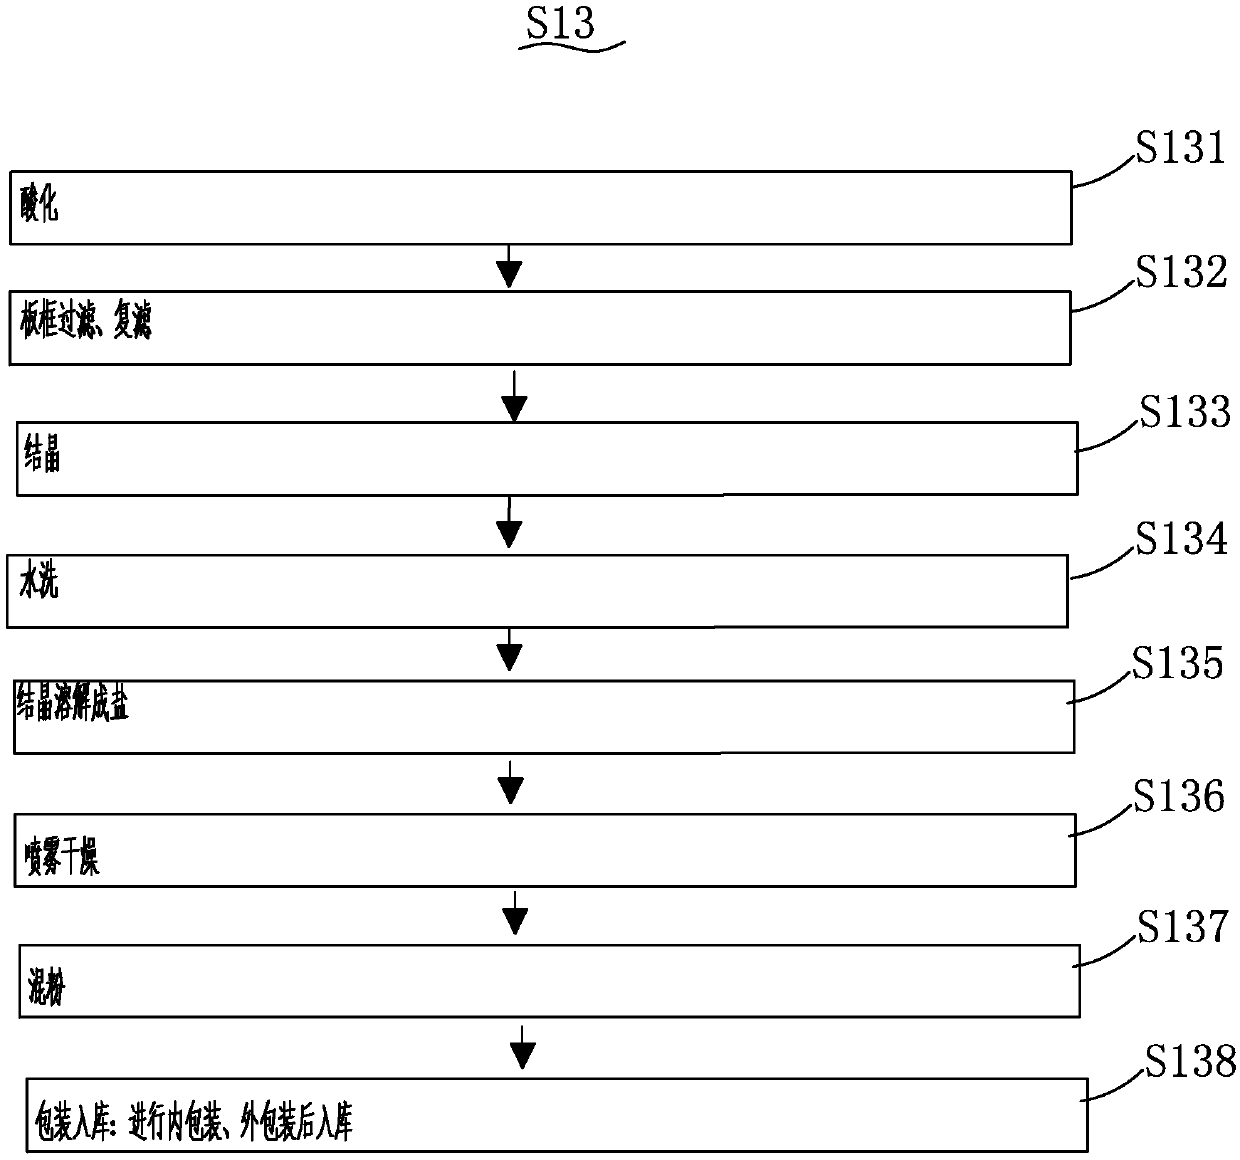 Production process for synthesizing macrolide antibiotics special for poultry and livestock through fermentation of acetylisovaleryltylosin tartrate